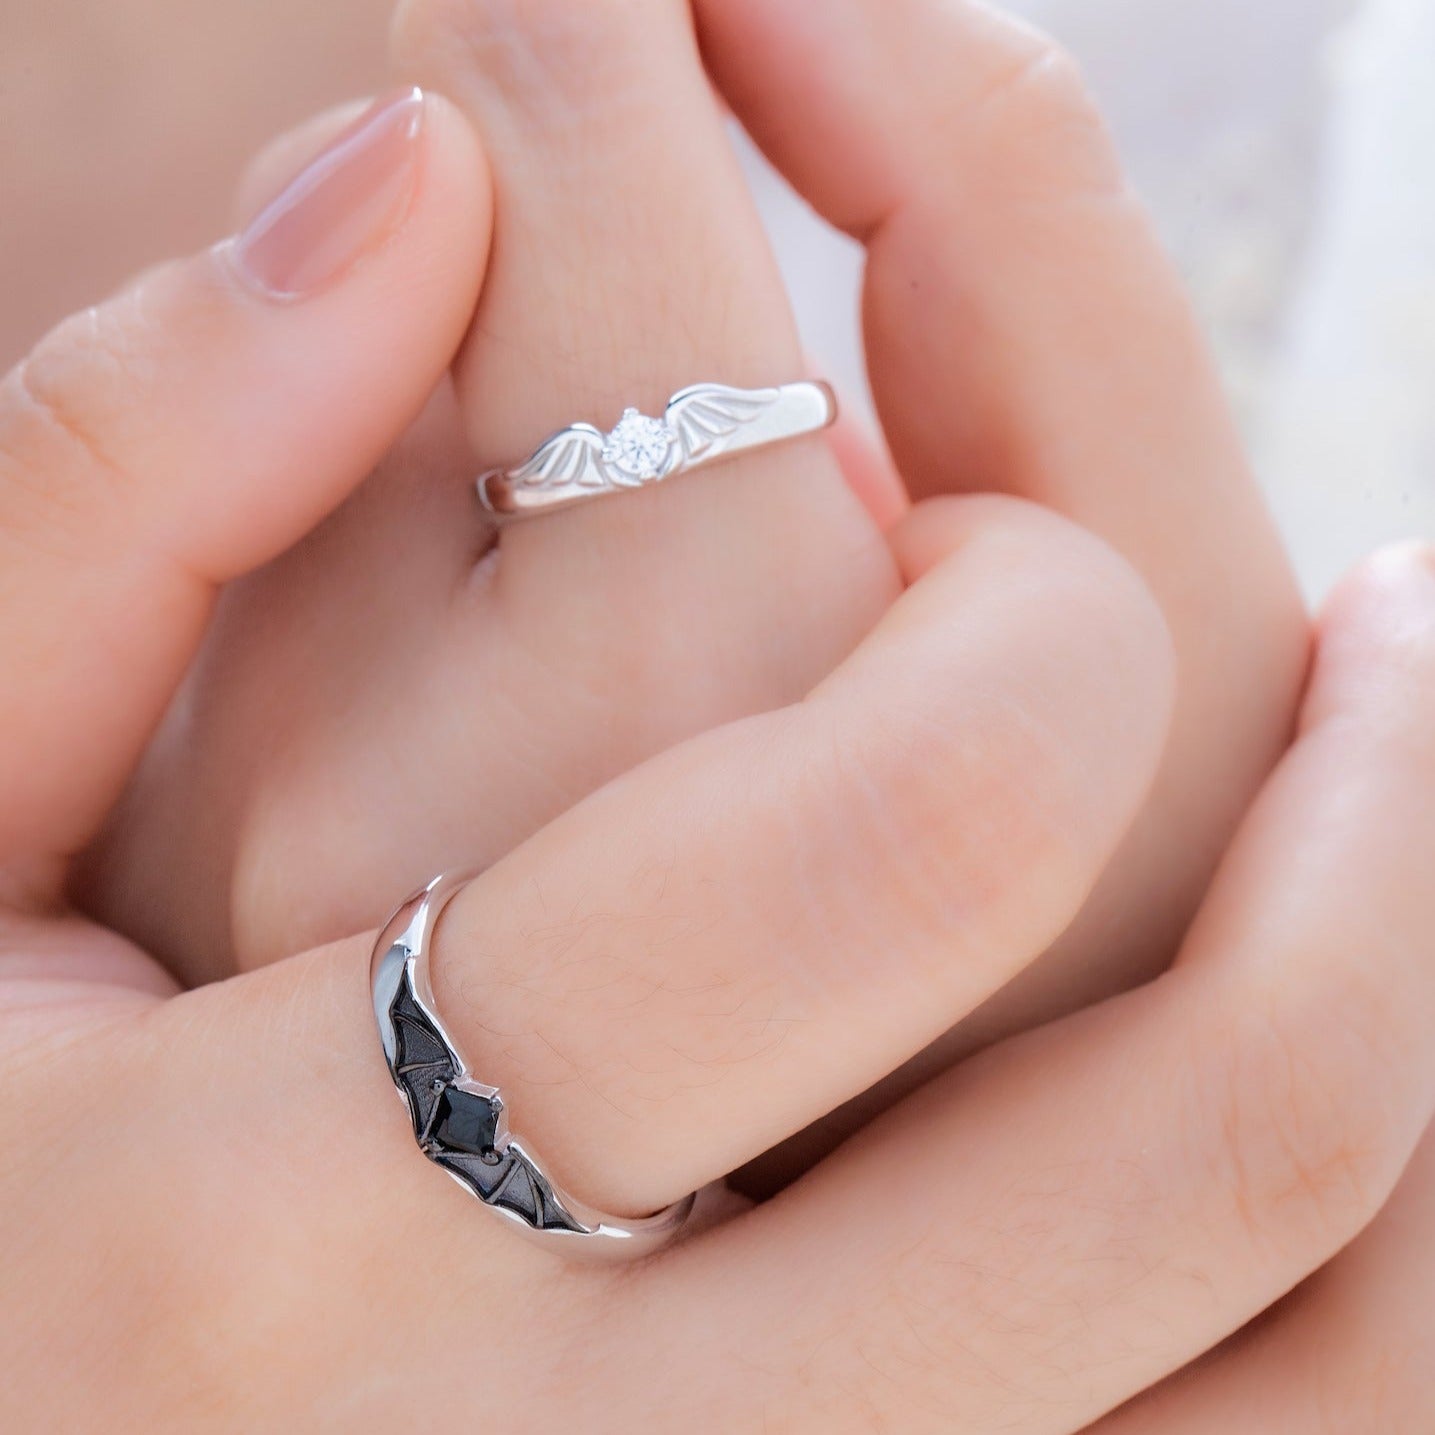 Crystal Openable Adjustable Silver Diamond Wedding Rings For Couples For  Couples Perfect For Engagement, Wedding, And Fashion Jewelry Will And Sandy  Design From Shanshan123456, $0.82 | DHgate.Com